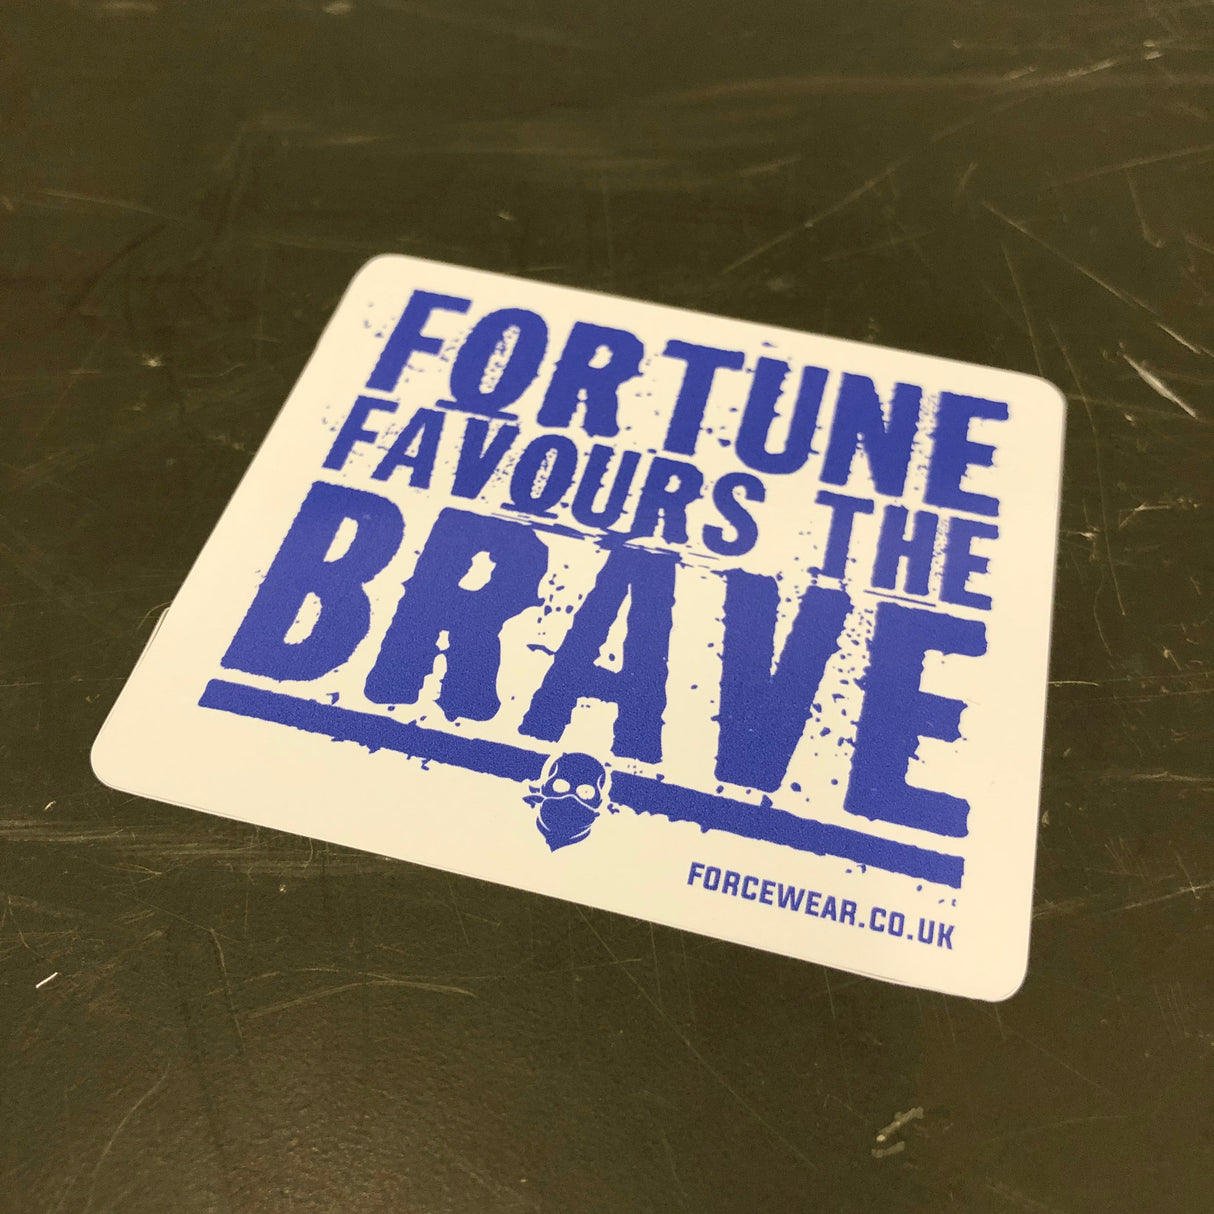 FORTUNE FAVOURS THE BRAVE STICKER 043 - Force Wear HQ